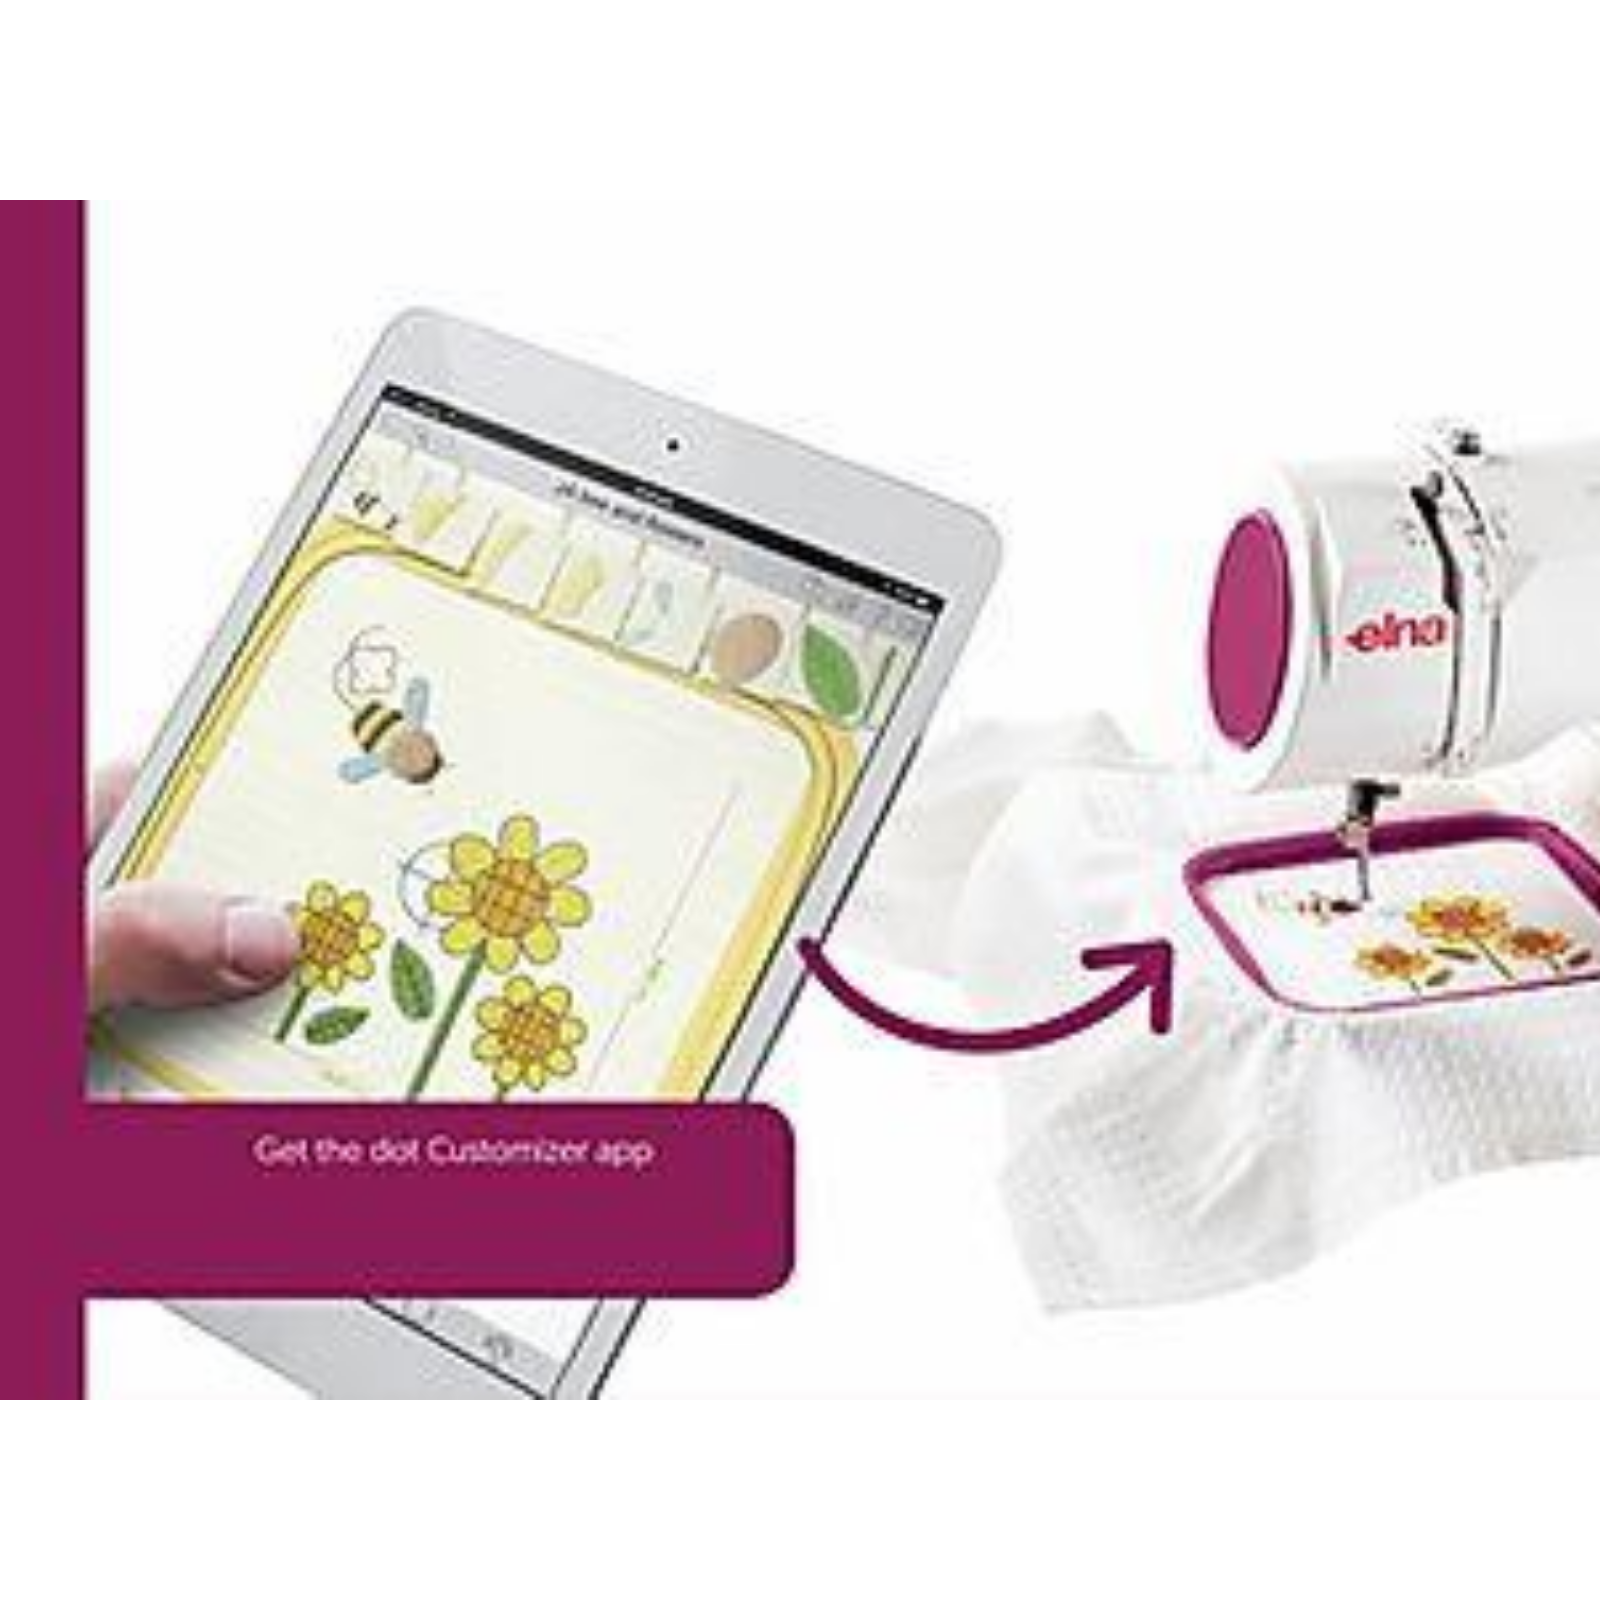 Elna Air Artist WiFi Enabled Embroidery Machine, 260 Built-In Designs & 12 Fonts - link your smartphone, apple or android devices